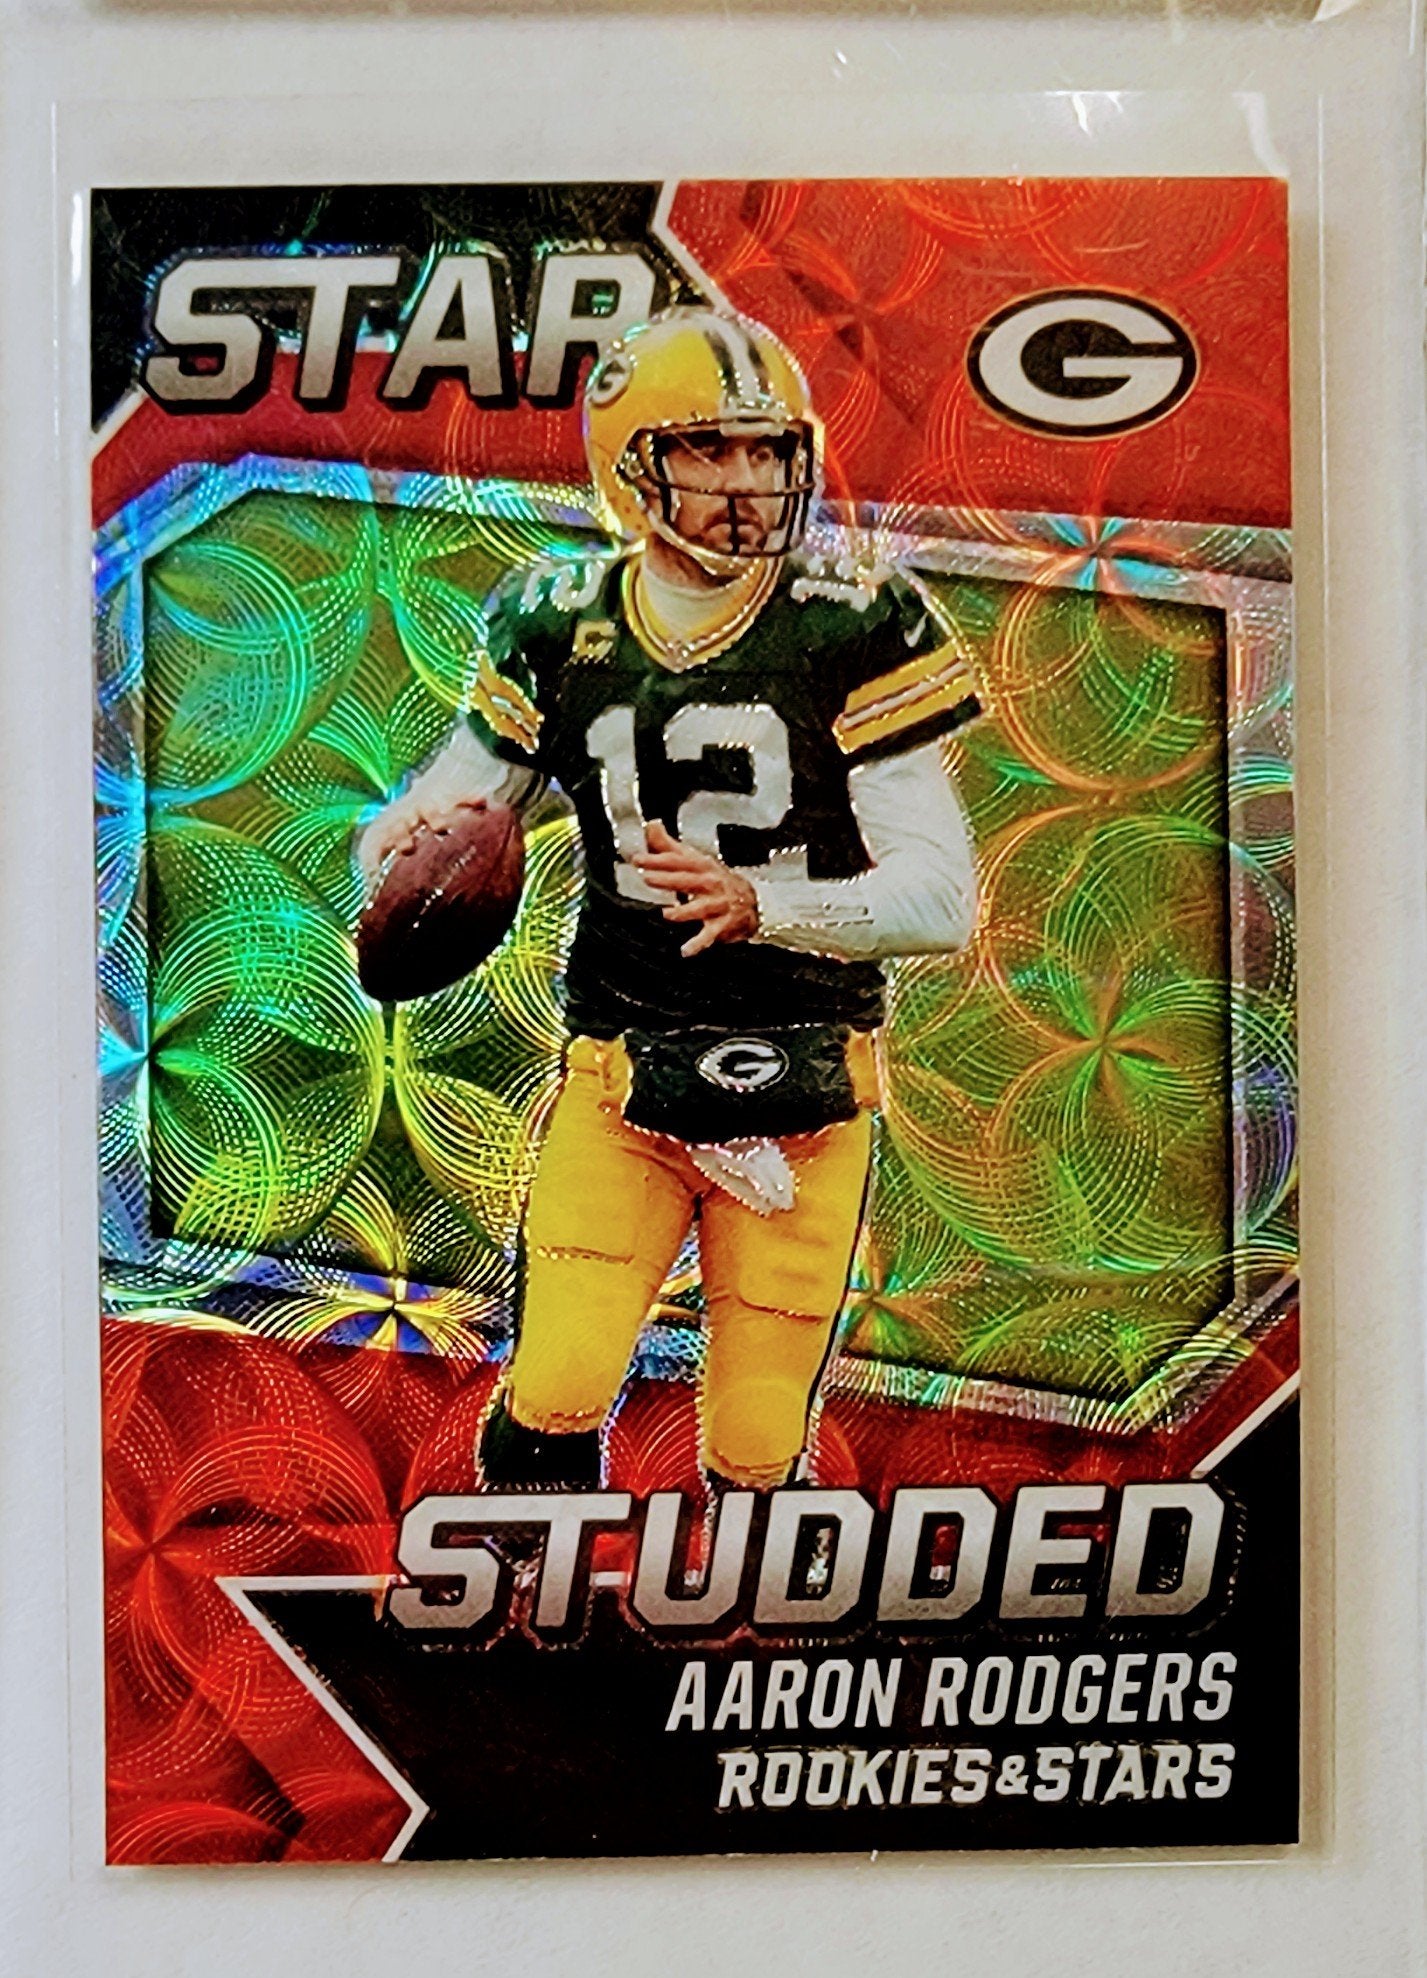 2021 Panini Rookies and Stars Aaron Rodgers Star Studded Scope Refractor Football Card AVM1 simple Xclusive Collectibles   